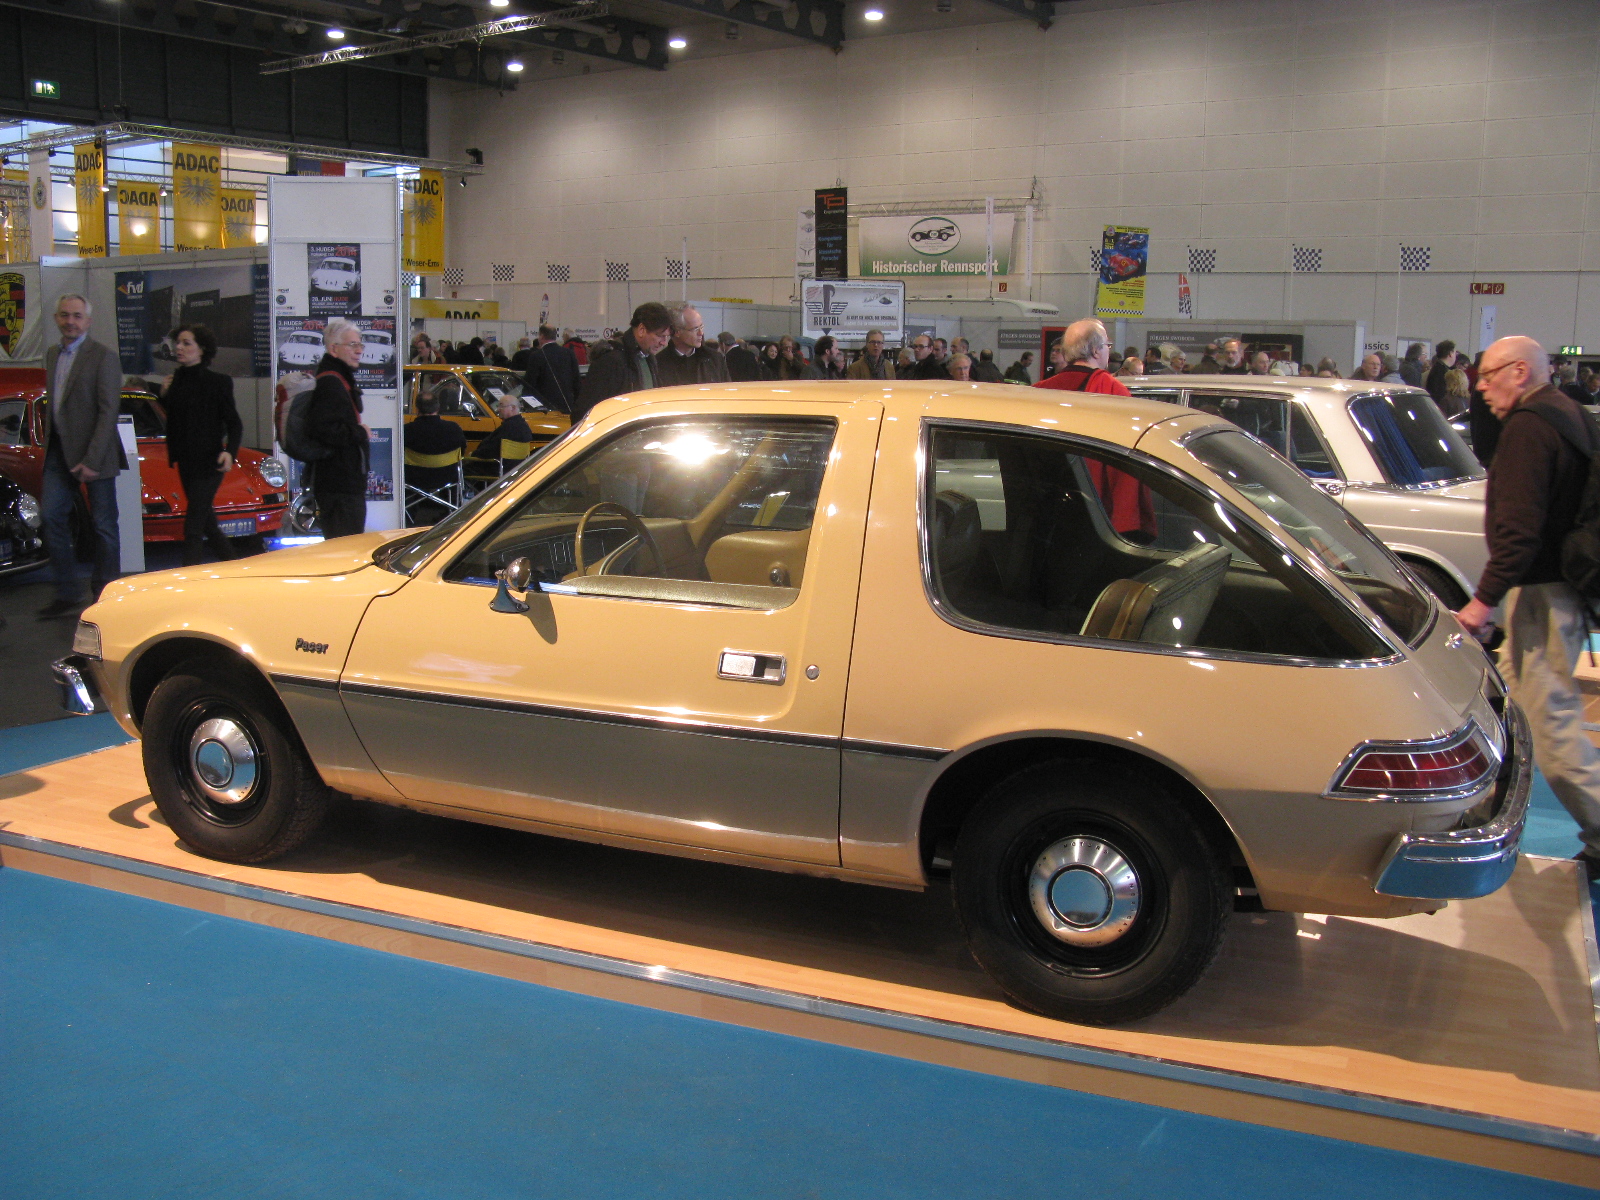 two old car are on display at a show